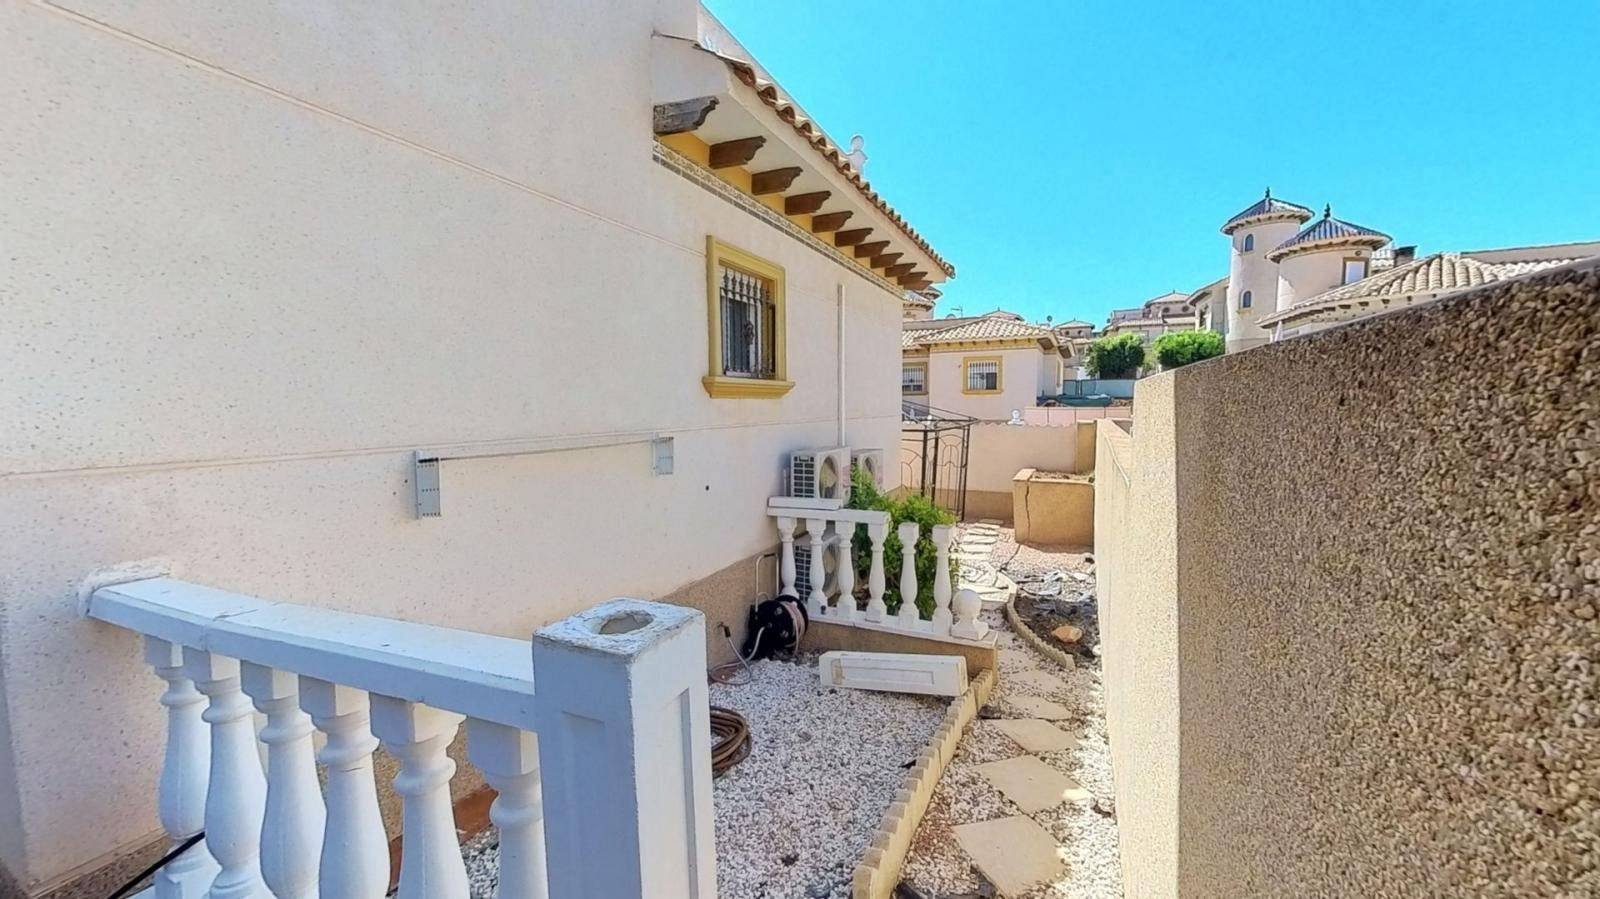 DETACHED VILLA WITH PRIVATE POOL CLOSE TO THE BEACHES AND ZENIA BOULEVARD